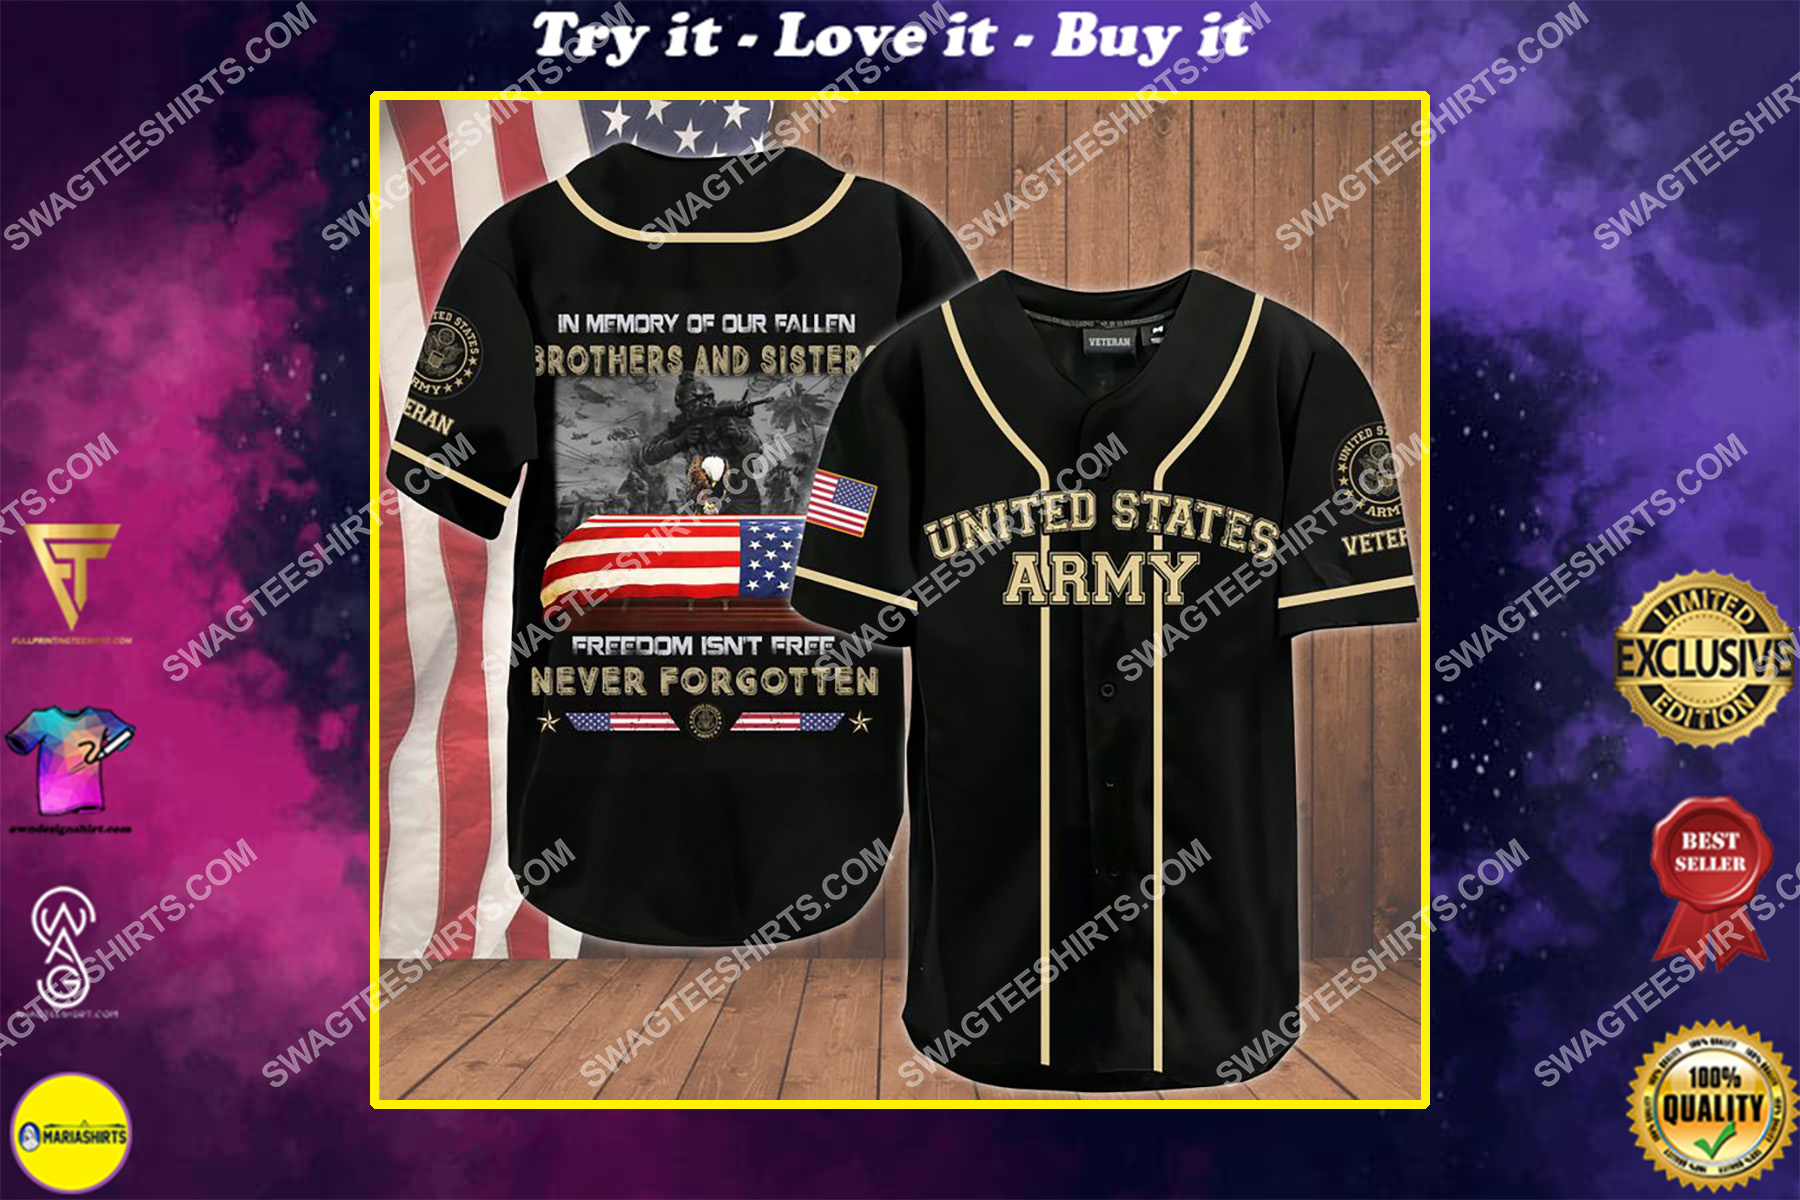 in memory of our fallen brothers and sisters army veteran baseball shirt